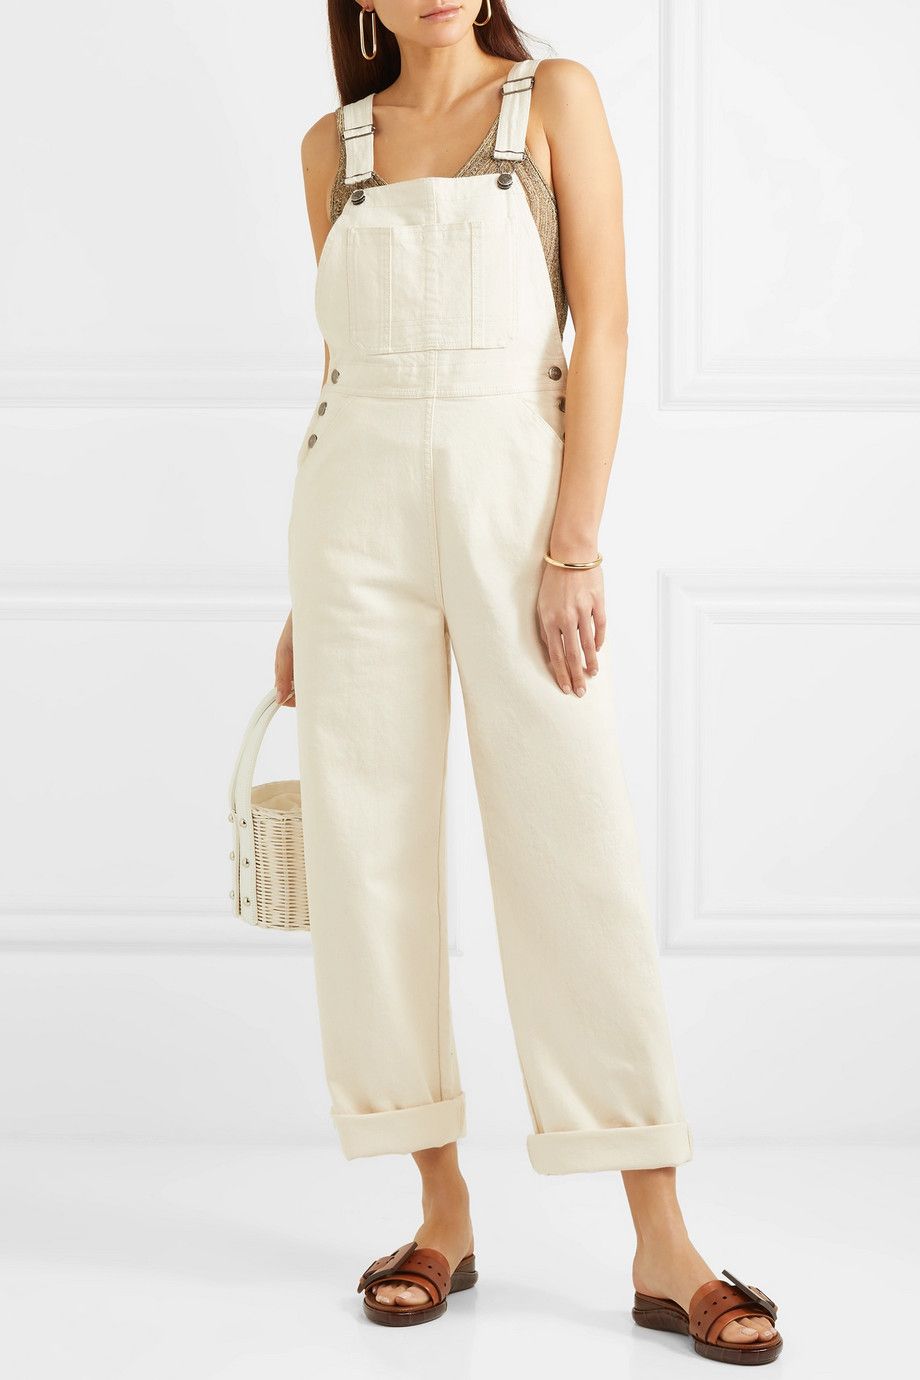 Go simple with overalls